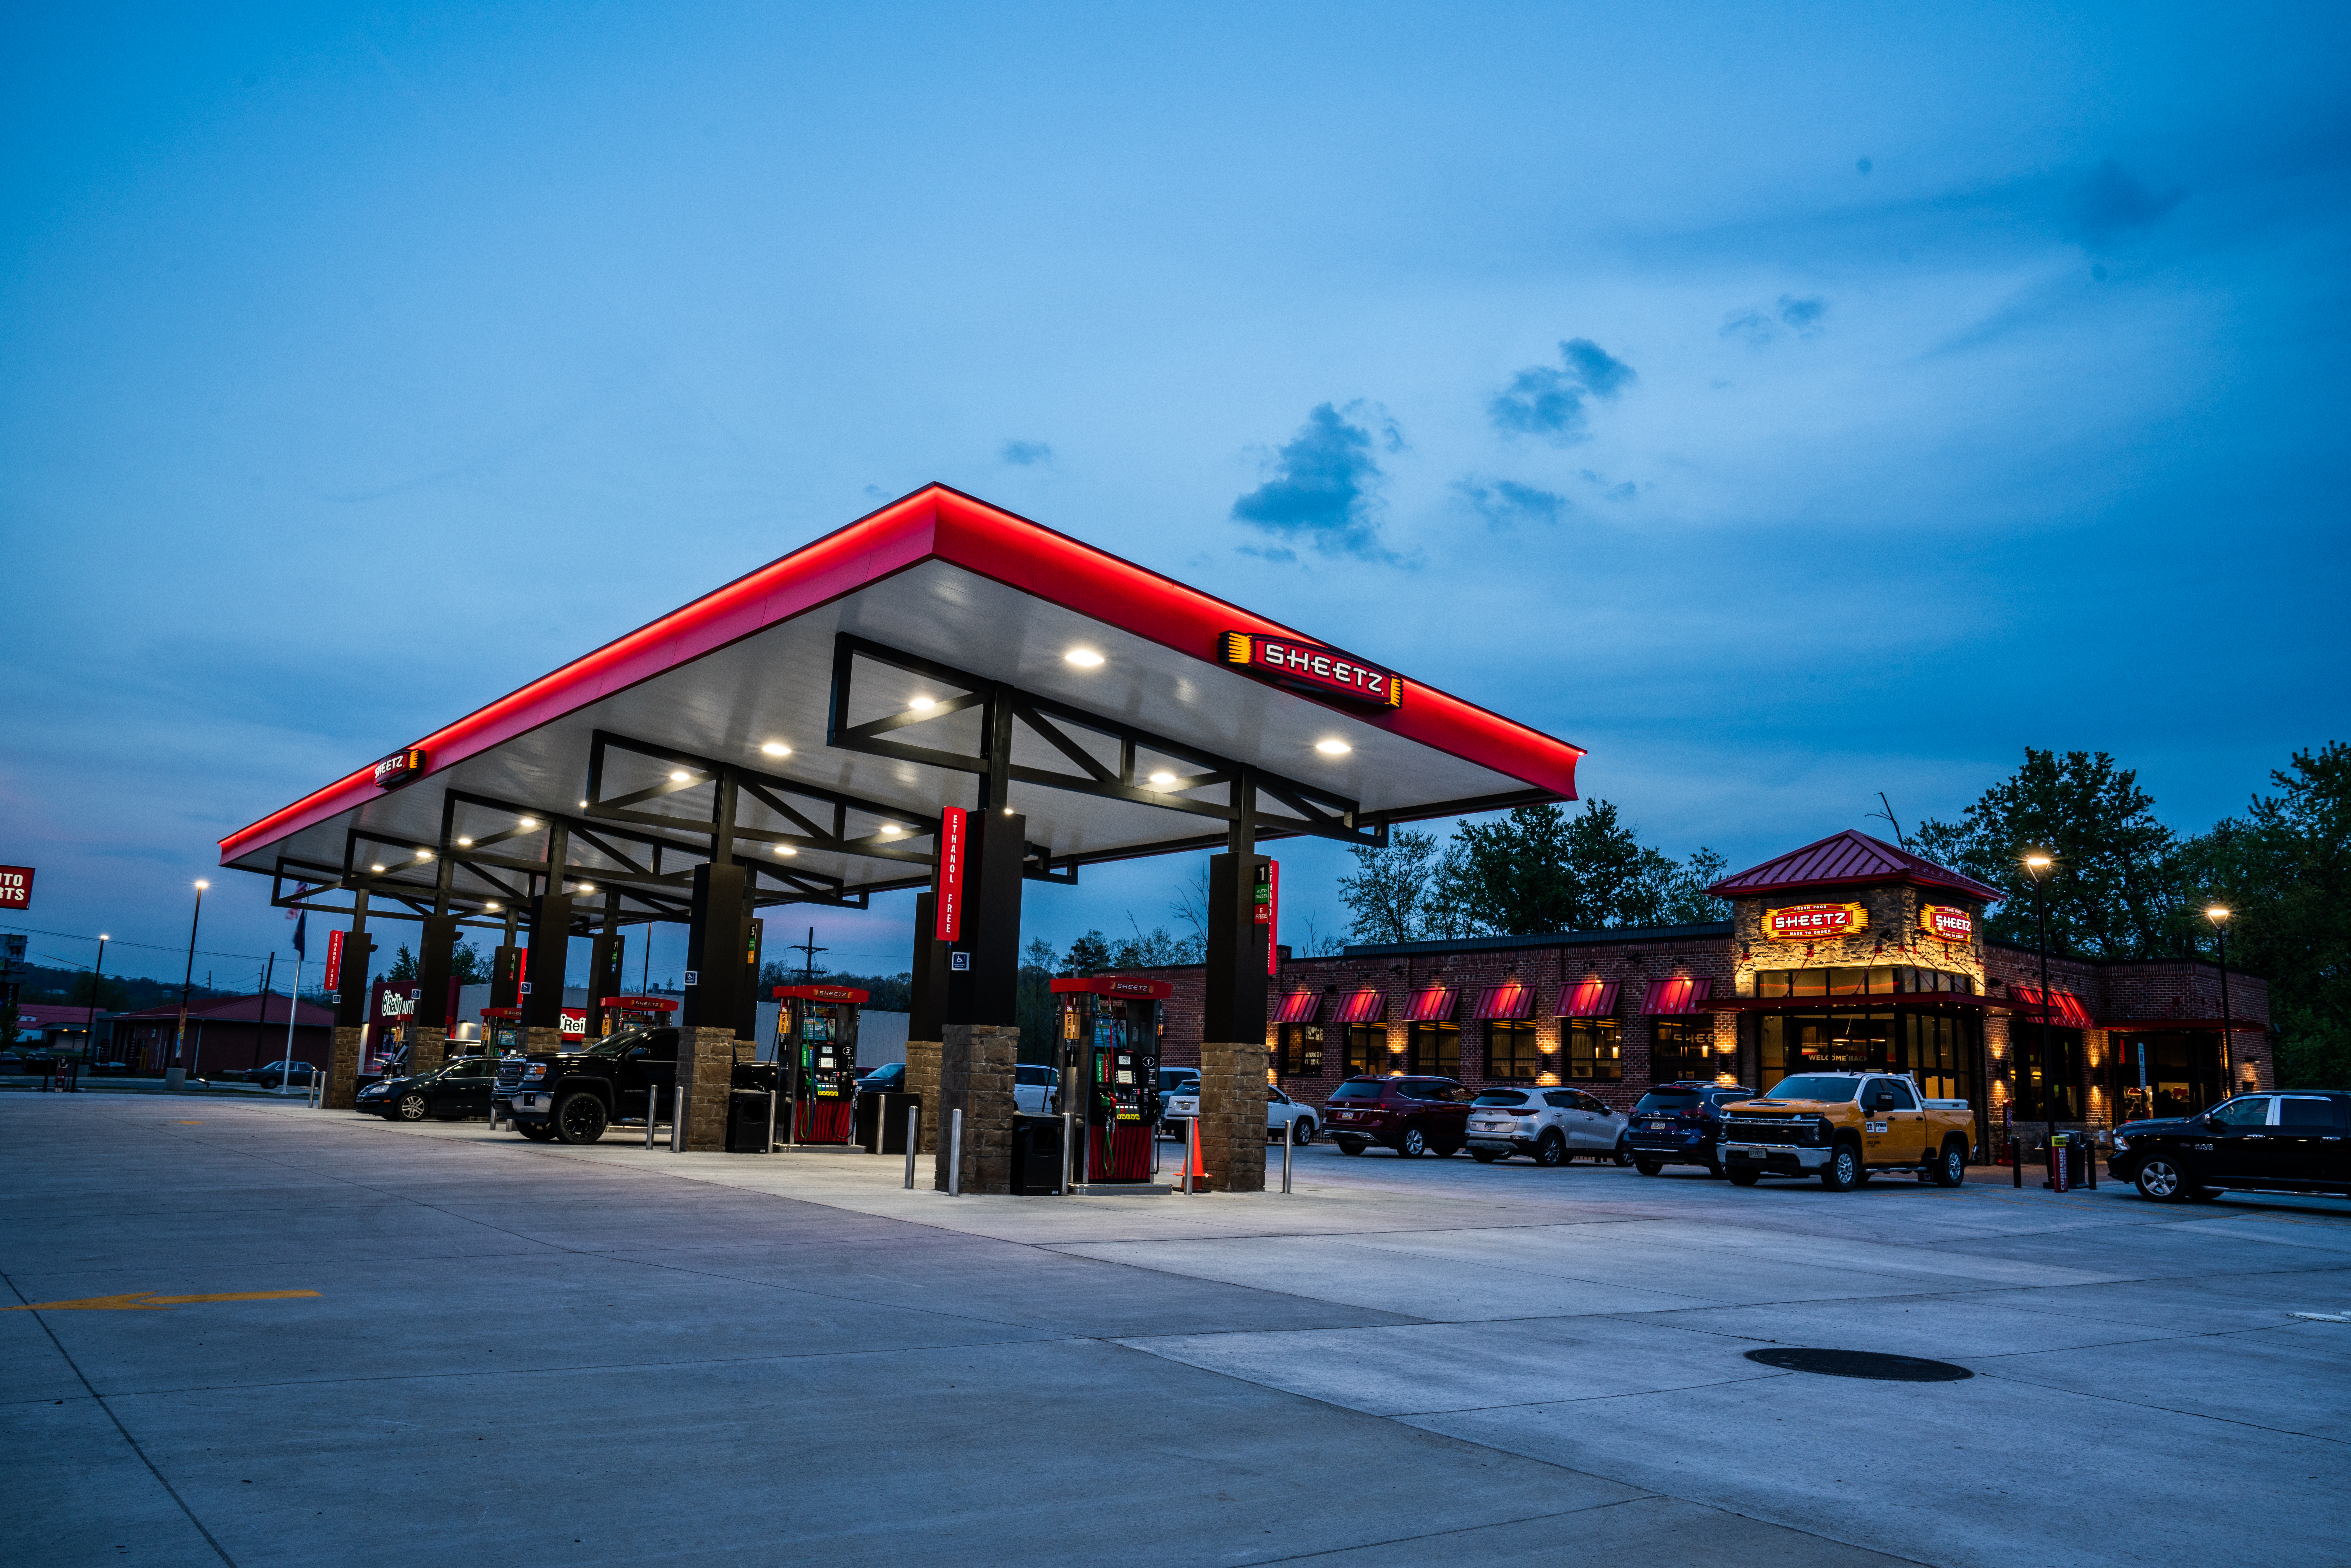 The exterior of a Sheetz gas station.